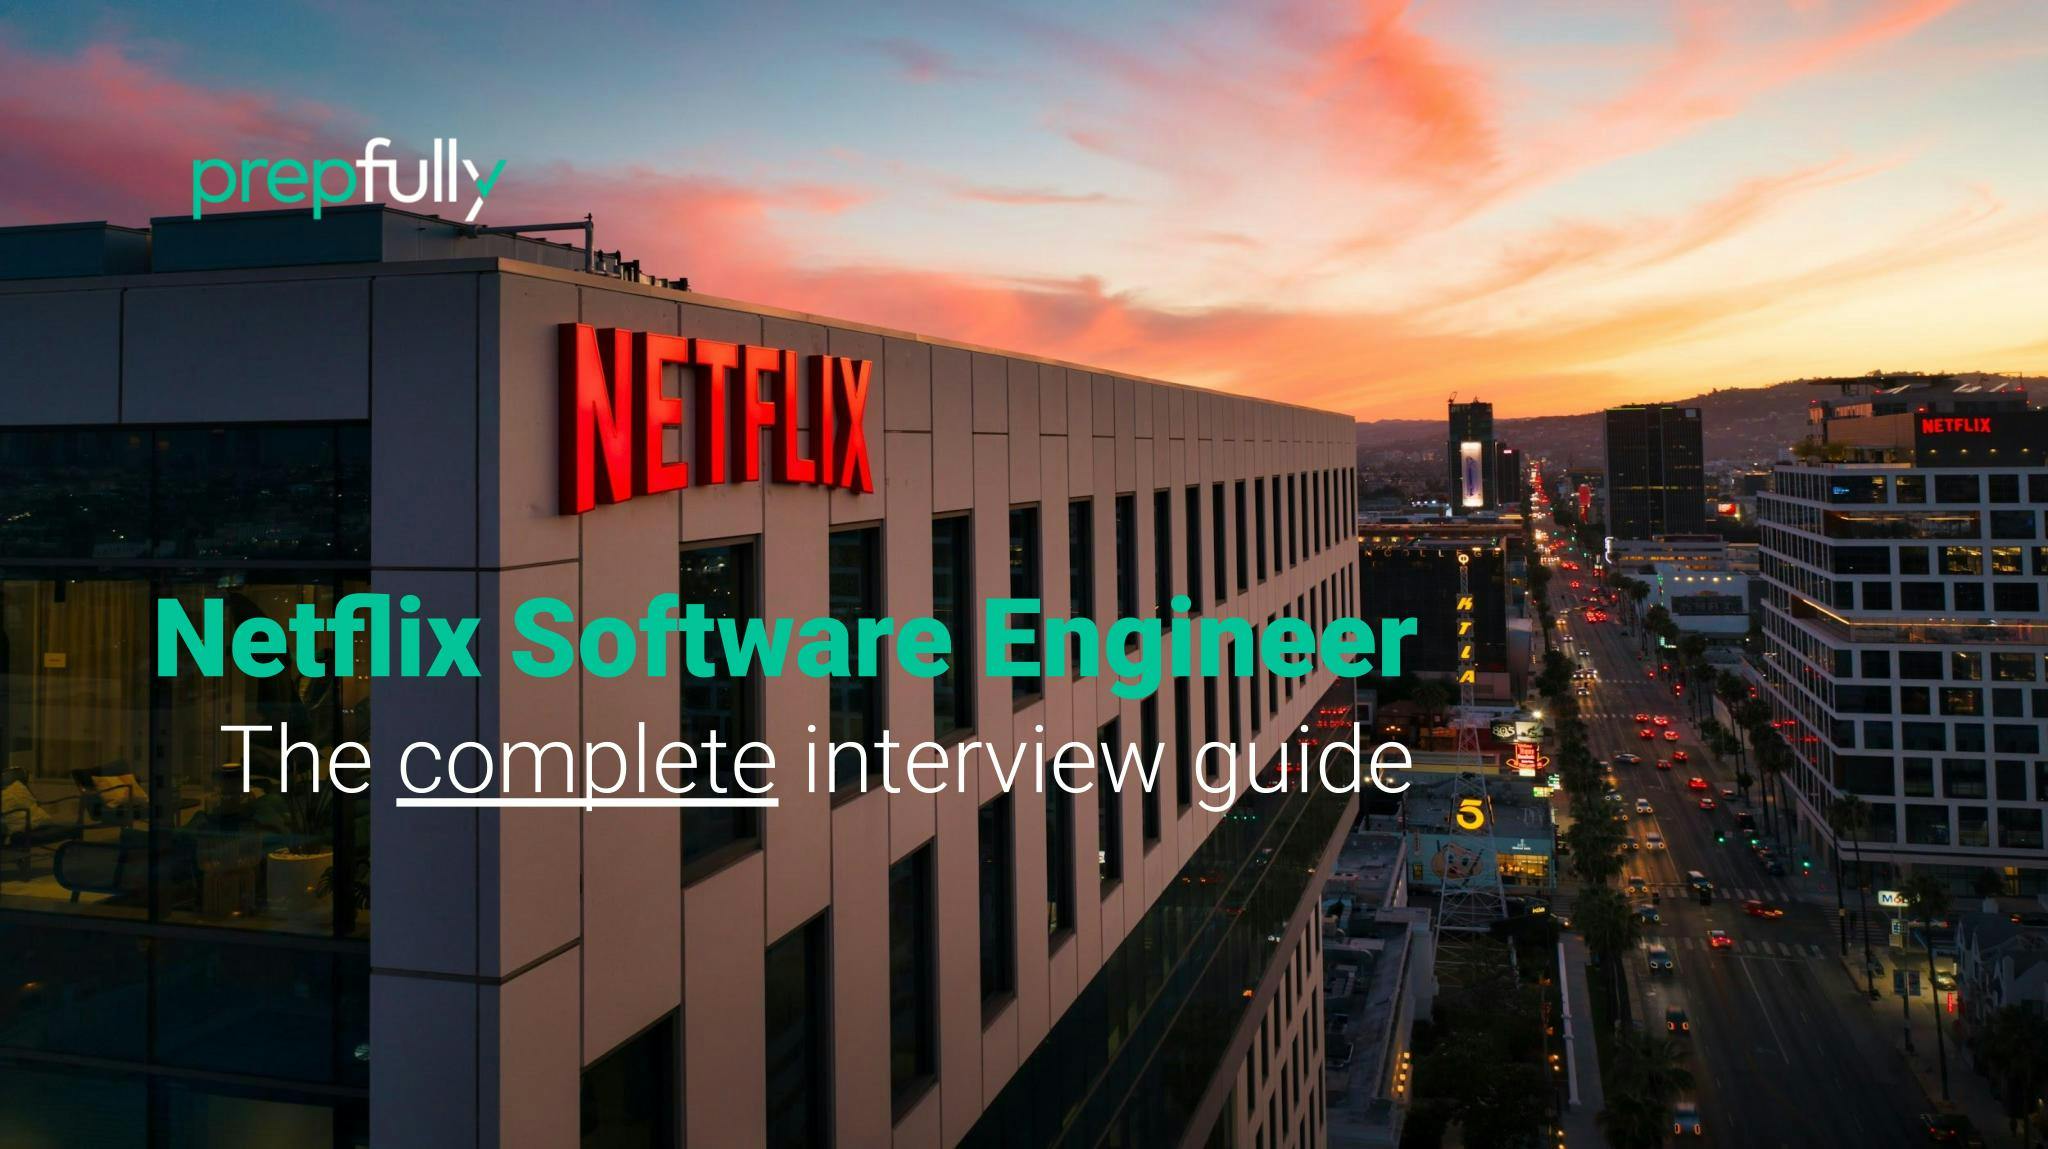 The essential guide for Netflix's Software Engineer interview Prepfully